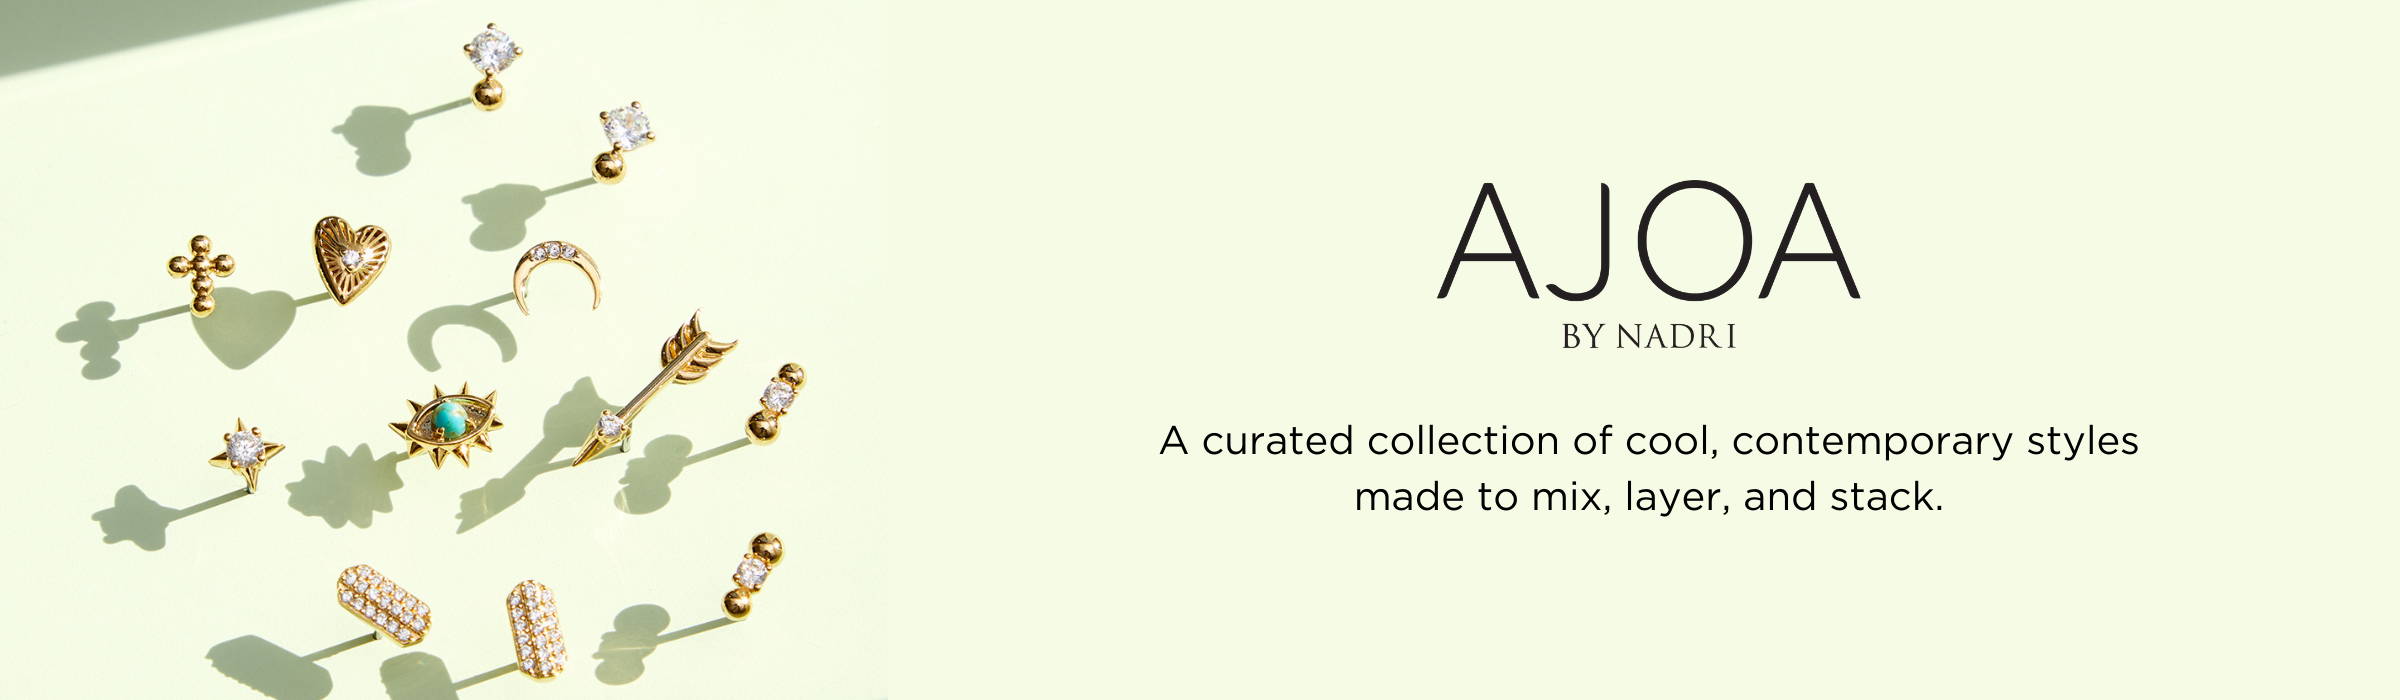 Shop AJOA by Nadri. A curated collection of cool, contemporary styles made to mix, layer, and stack. 